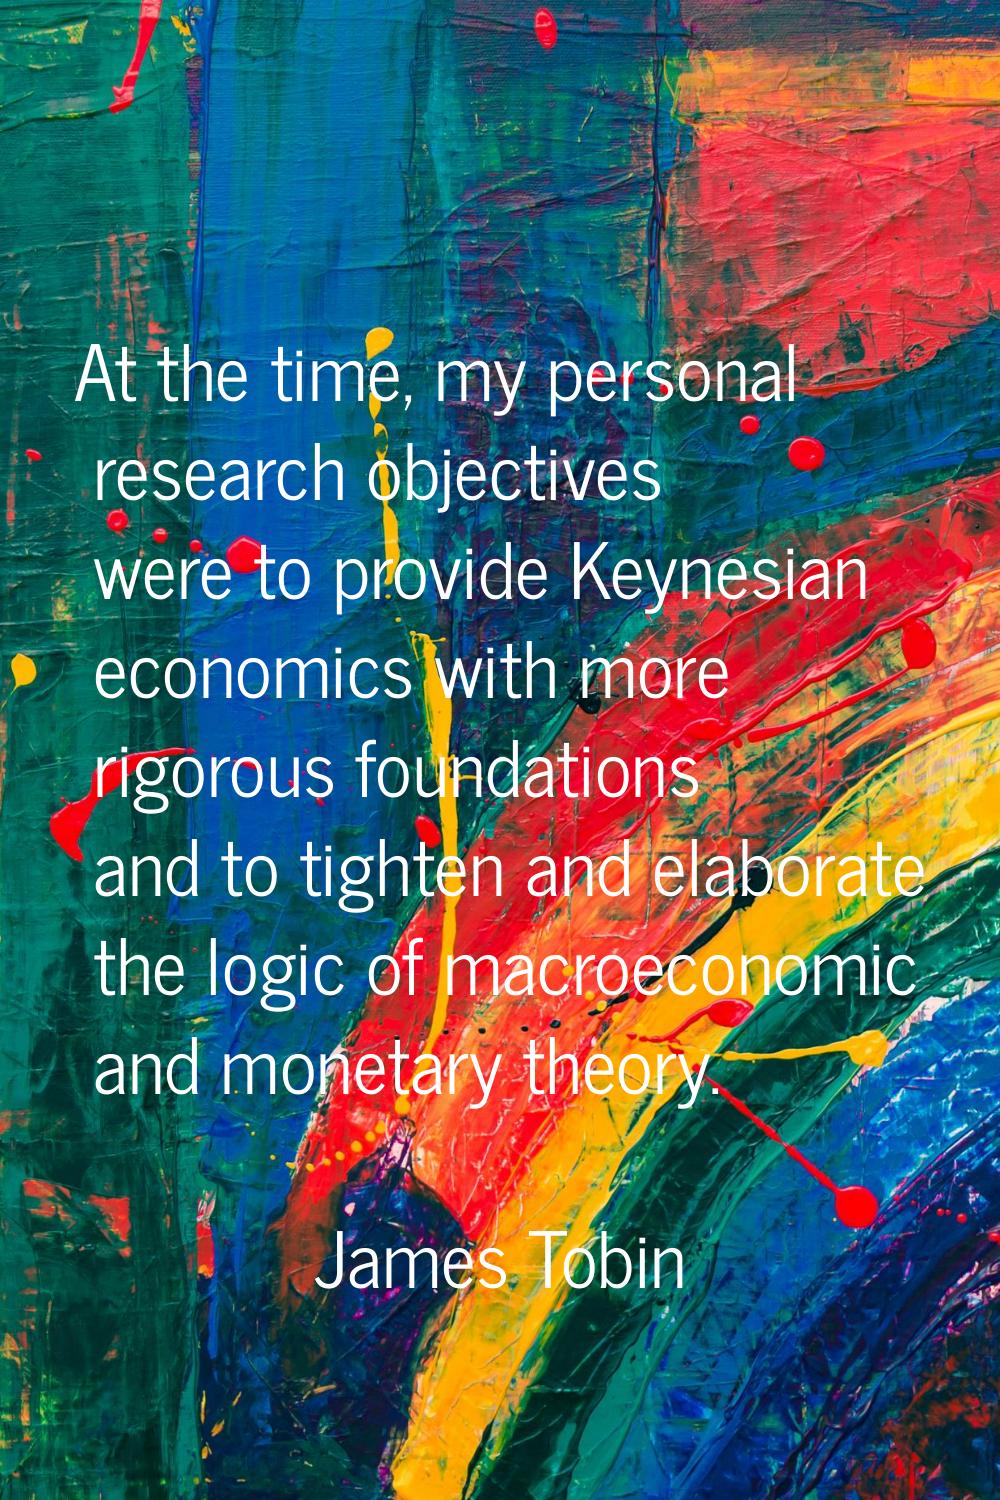 At the time, my personal research objectives were to provide Keynesian economics with more rigorous